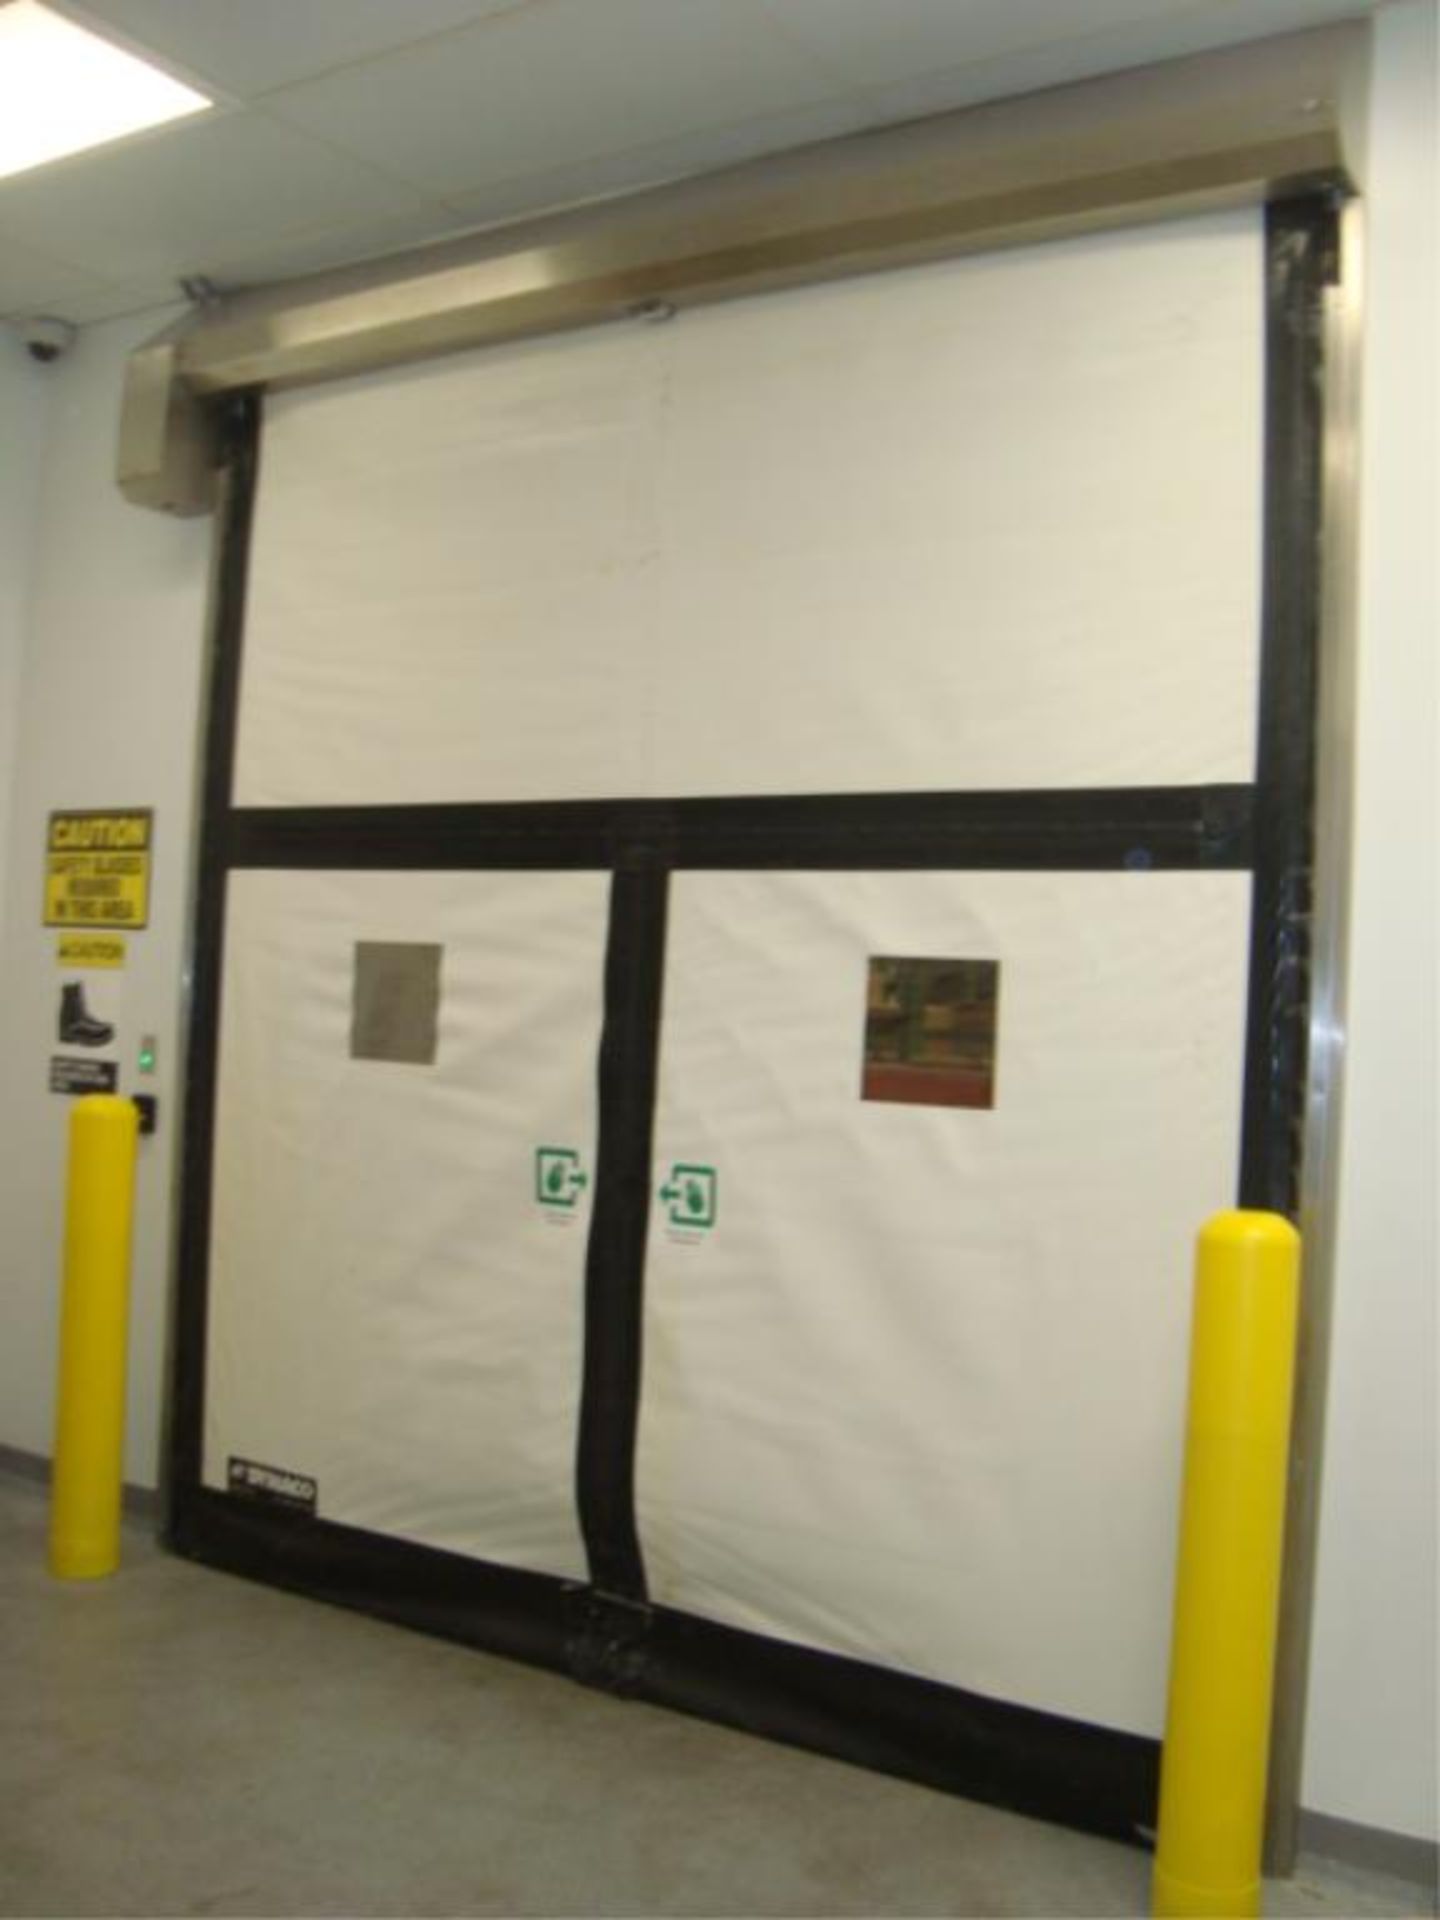 Cleanroom Roll Up Curtain Door - Image 5 of 8